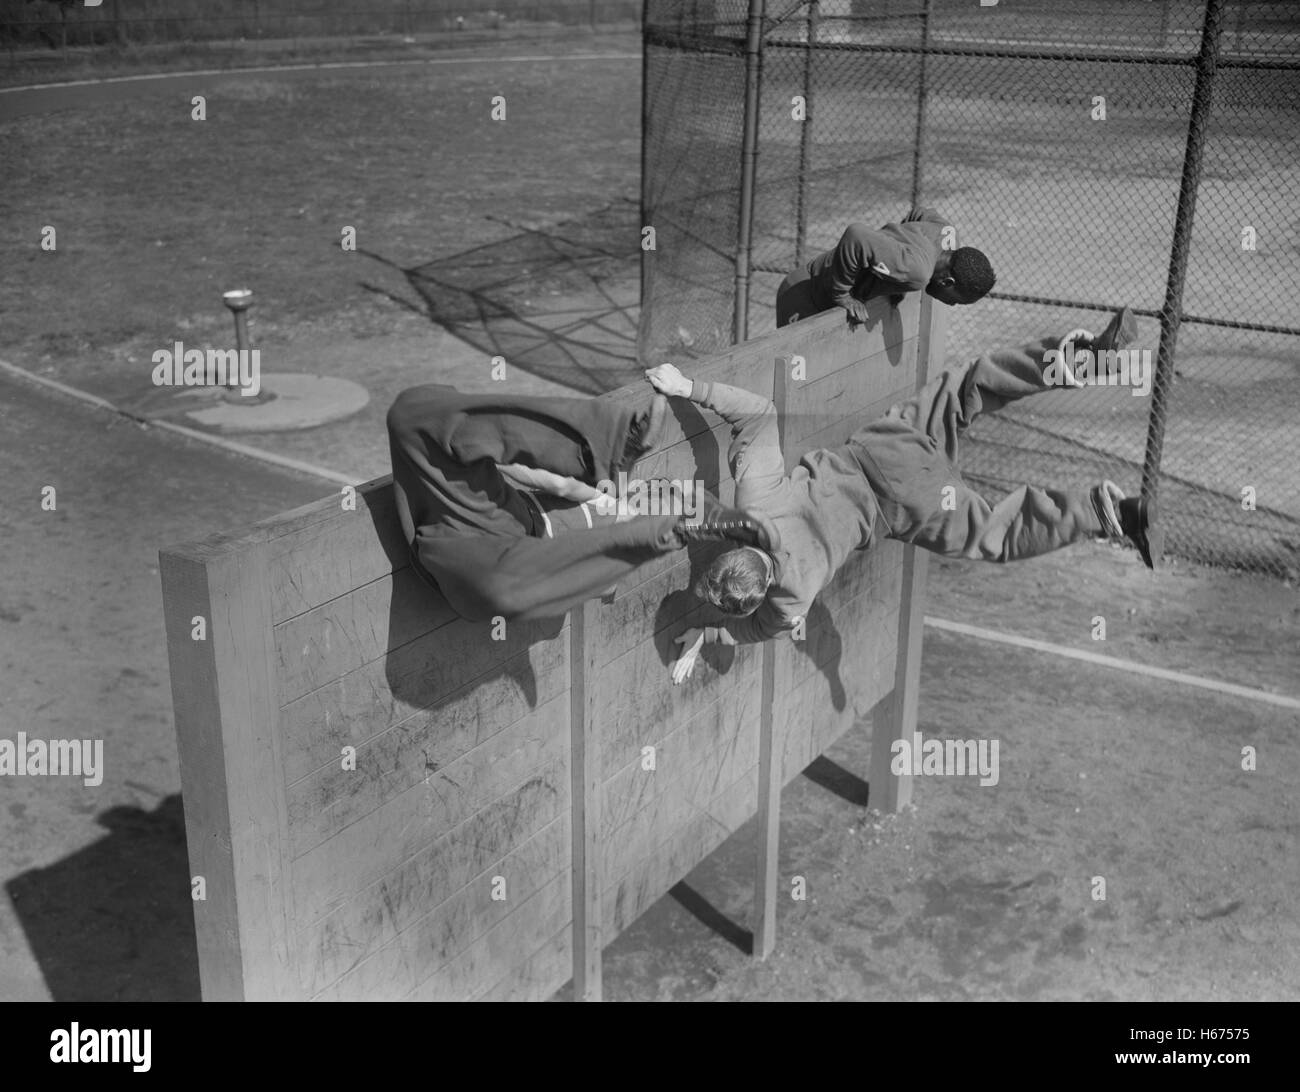 High School Victory Corps, Program Providing Training to Students Focusing on Skills Relevant to War Effort, Students on Obstacle Course, Flushing, New York, USA, William Perlitch, Office of War Information, October, 1942 Stock Photo